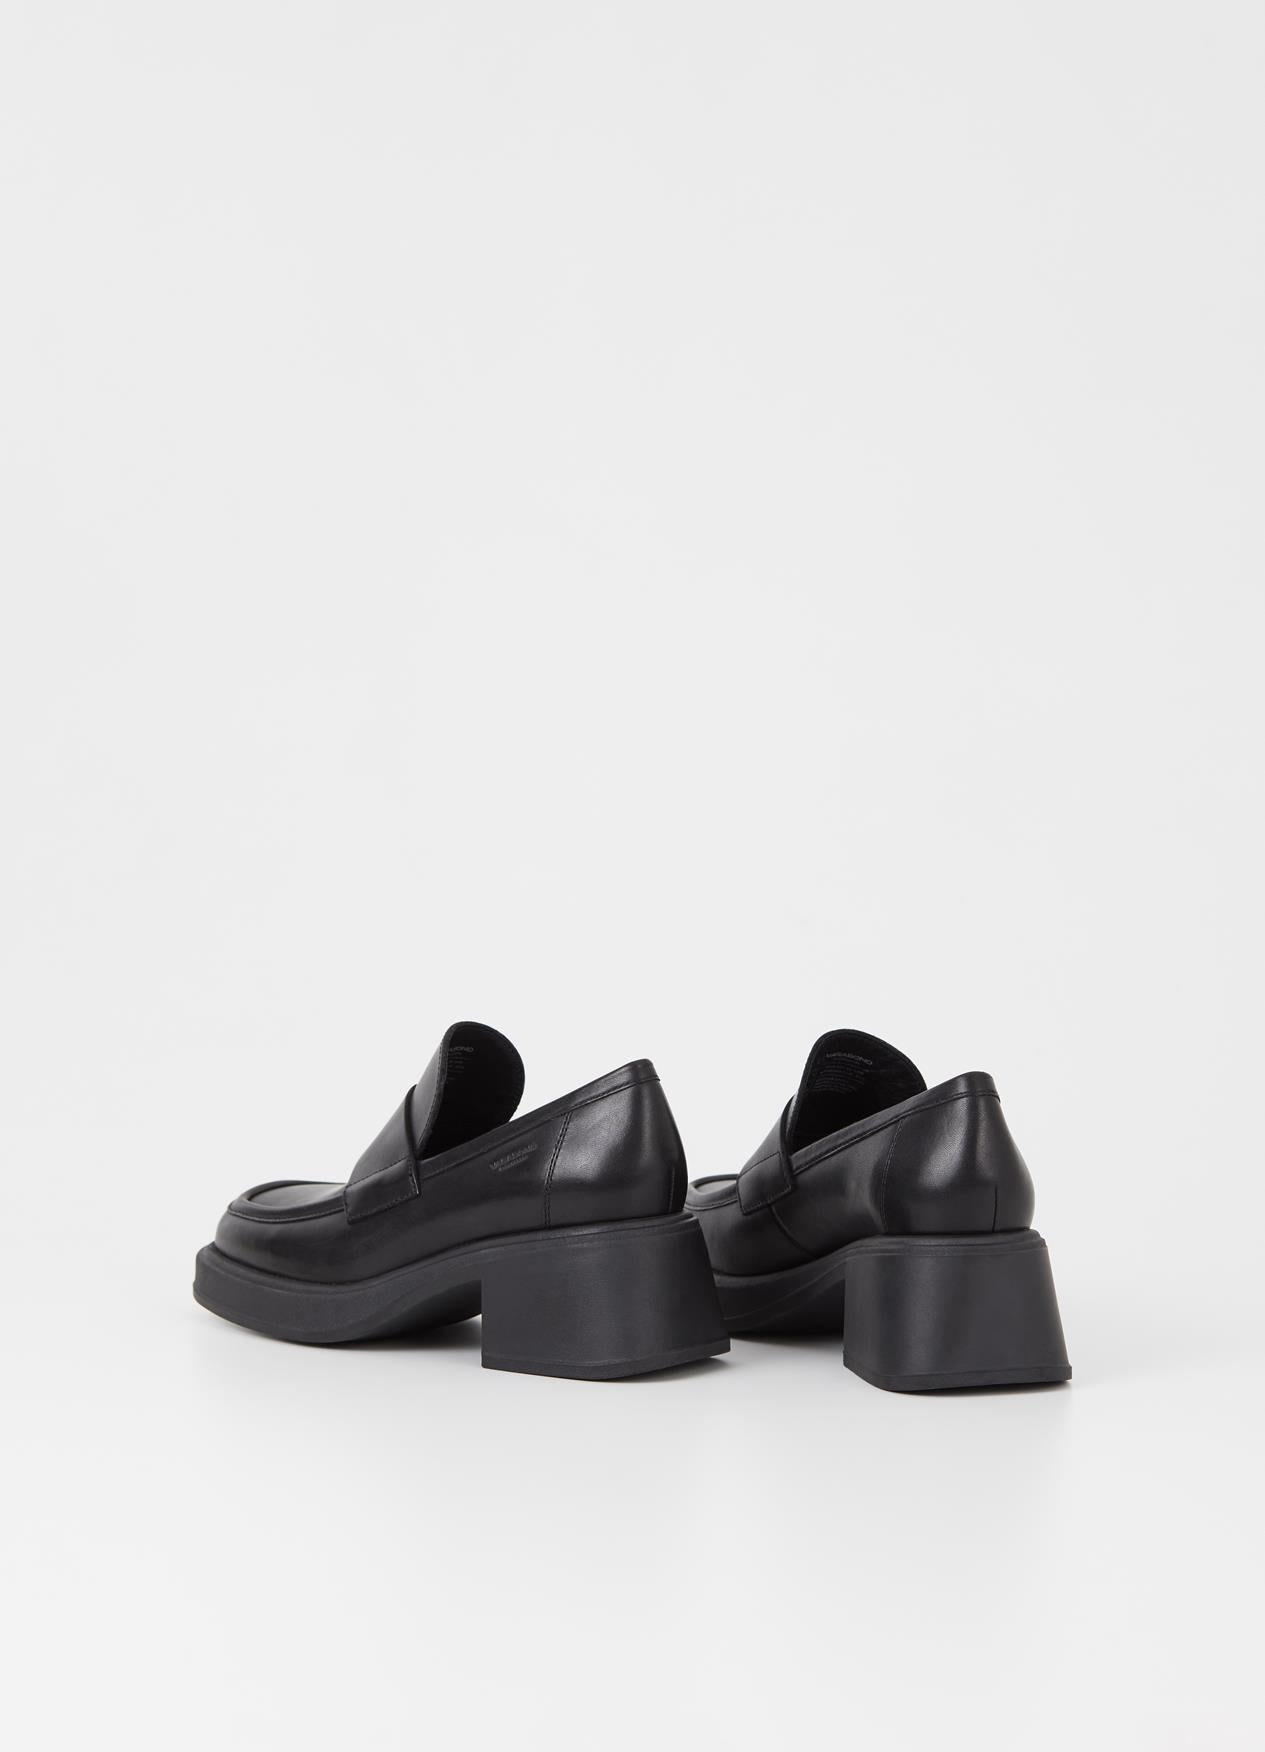 Vagabond Dorah loafers chunky contemporary loafers mid-heel | Pipe and ...